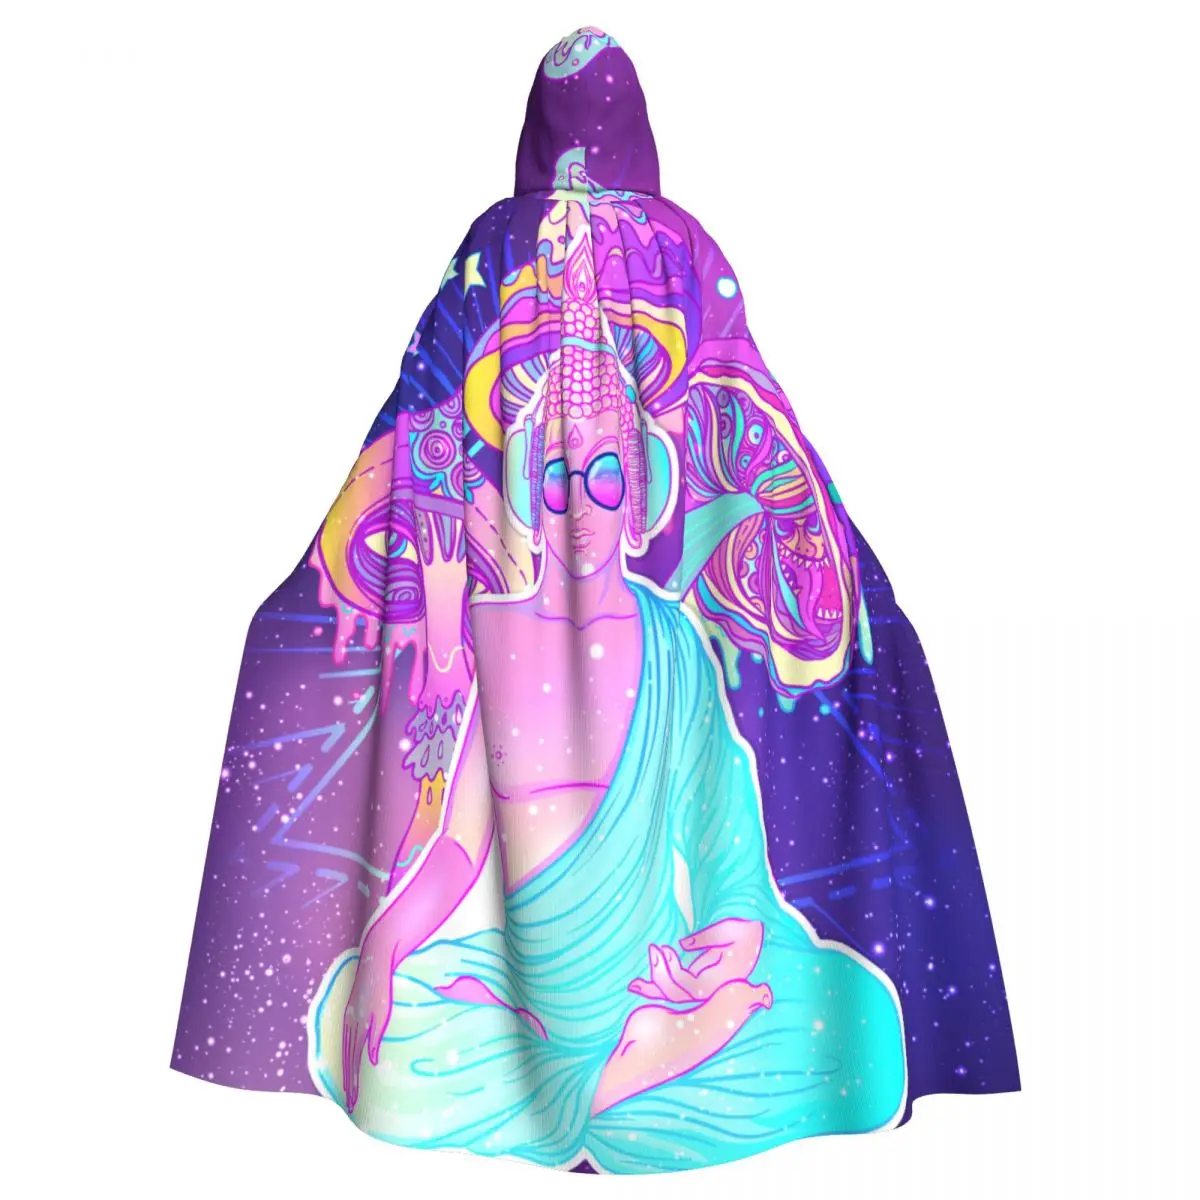 

Colorful Buddha In Rainbow Glasses Psychedelic Mushrooms Hooded Cloak Polyester Unisex Witch Cape Costume Accessory